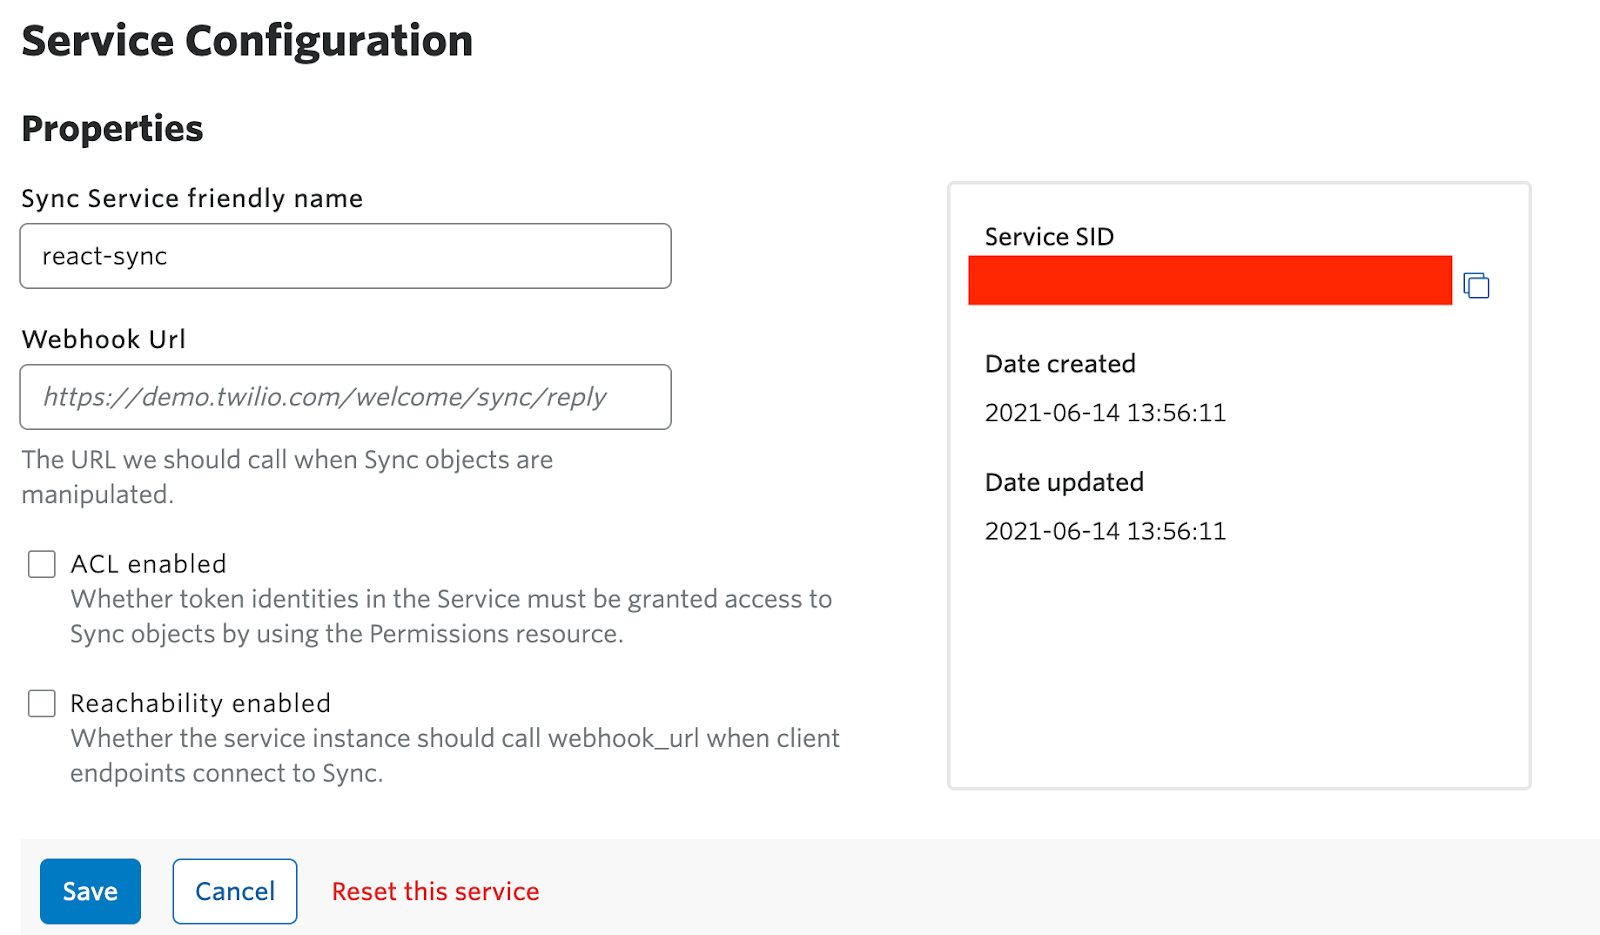 Screenshot of sync service configuration page with red rectangle blurring out a service SID